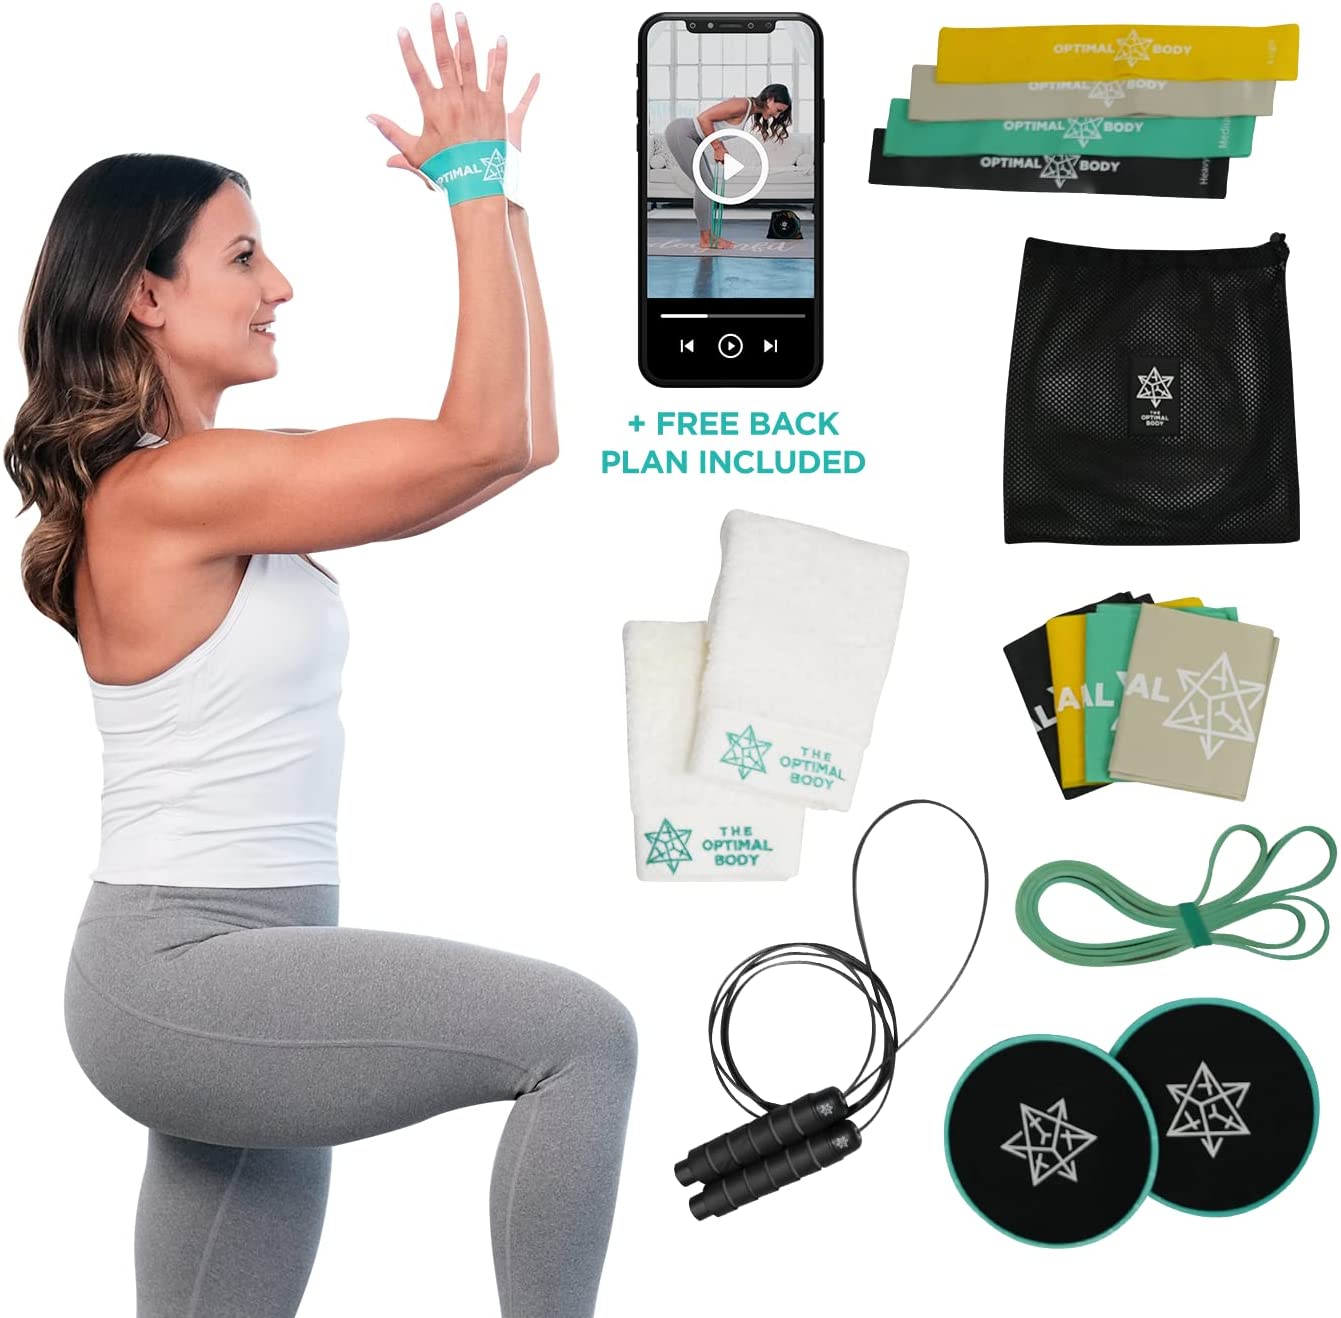 Exercise Equipment for Home Physical Therapy Workouts: TOB Kit by Dr. Jen  Fraboni. Free Back Plan incl.